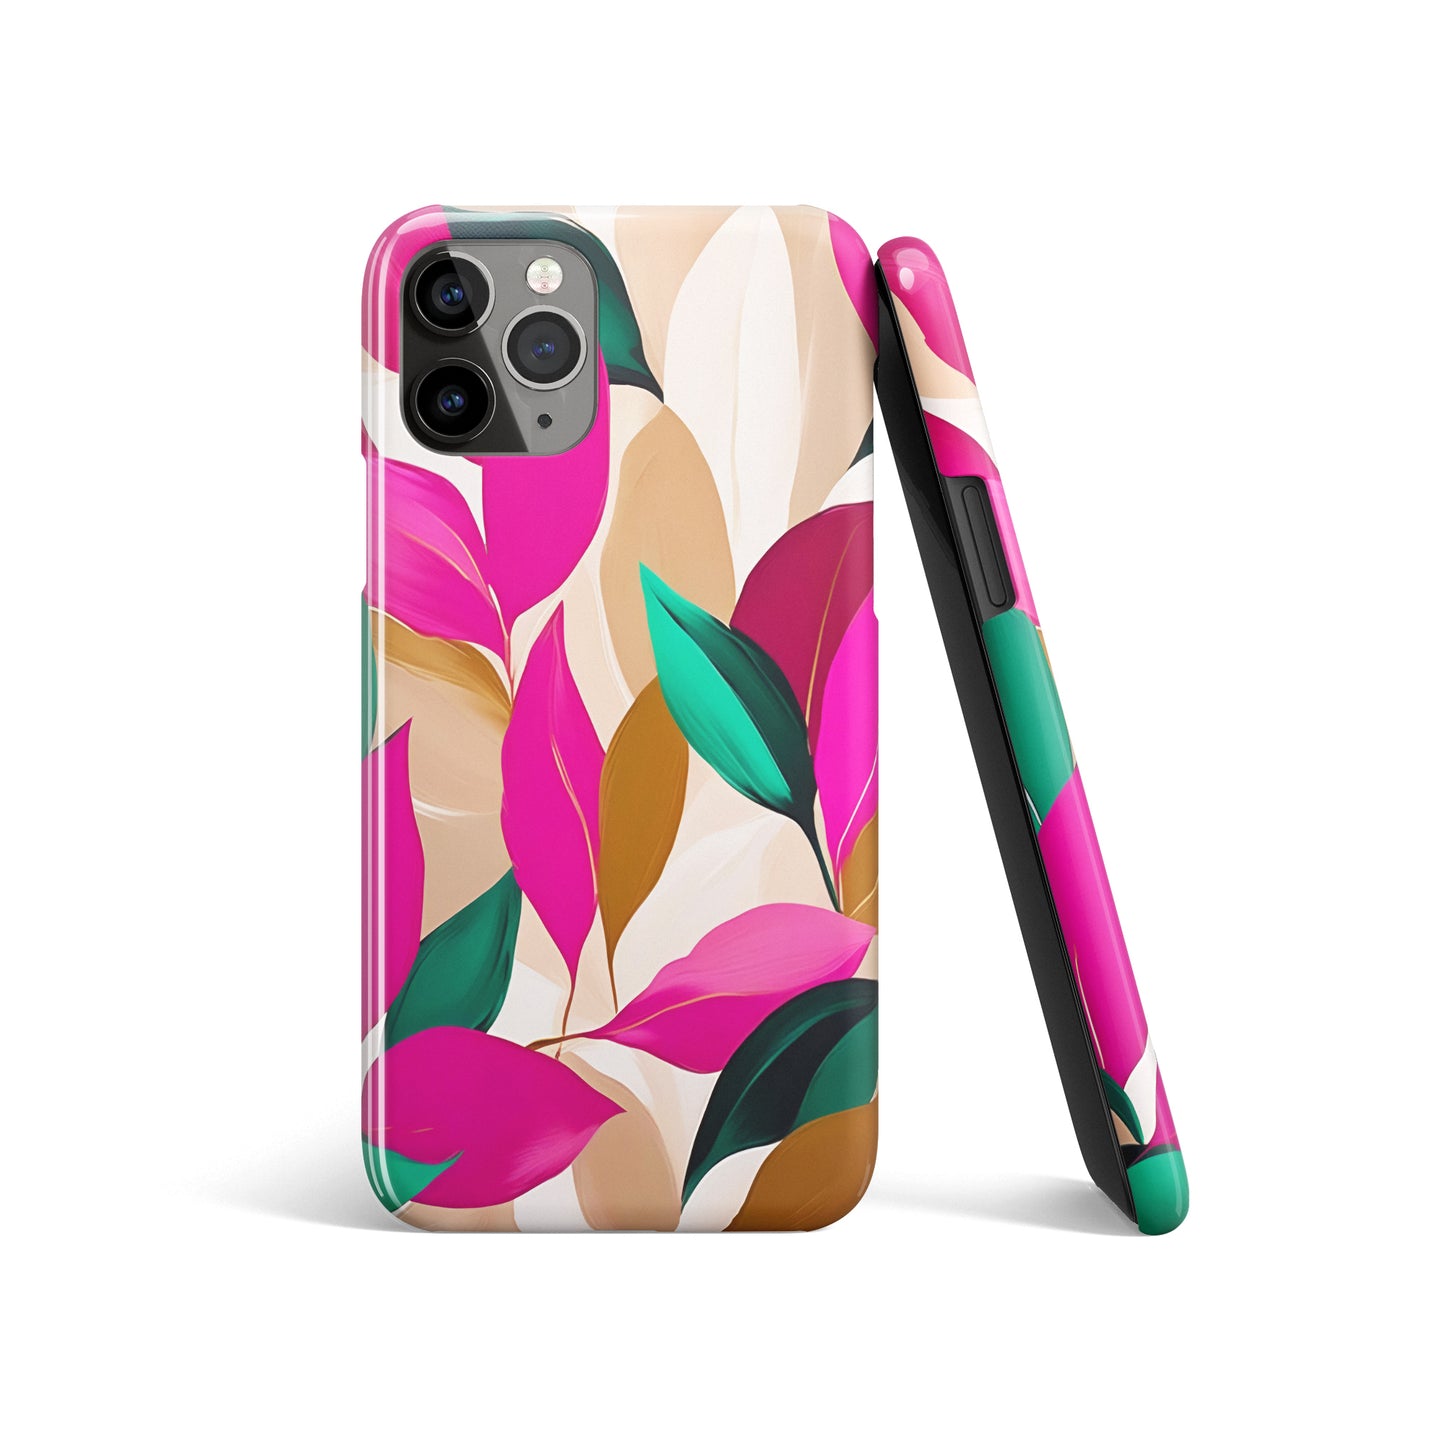 Floral Delight iPhone Case